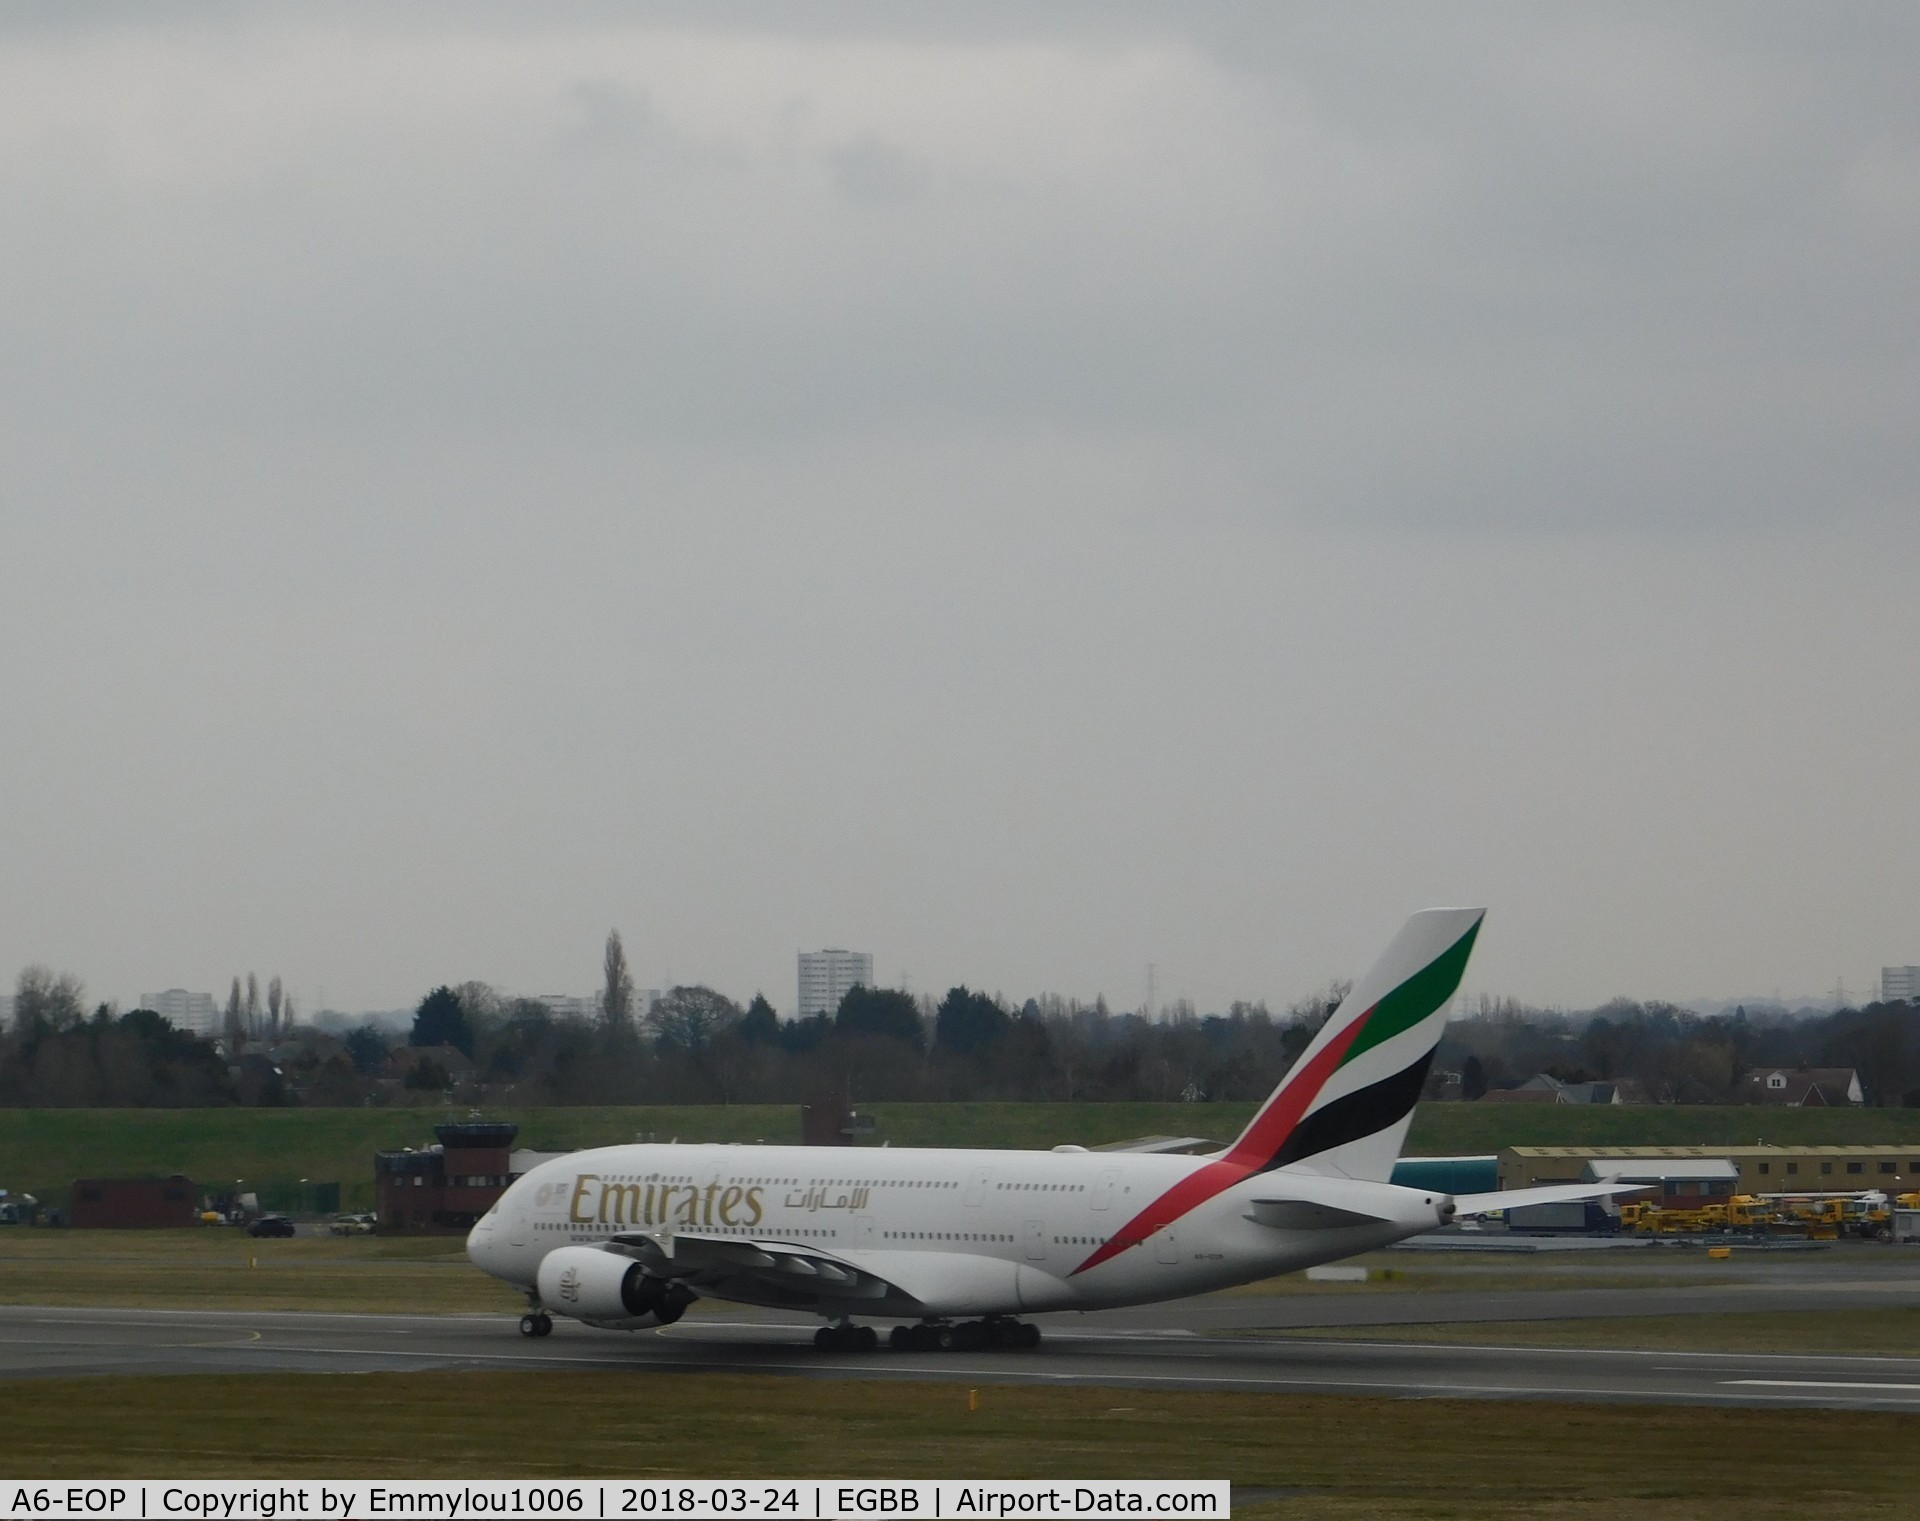 A6-EOP, 2015 Airbus A380-861 C/N 200, from freeport car park